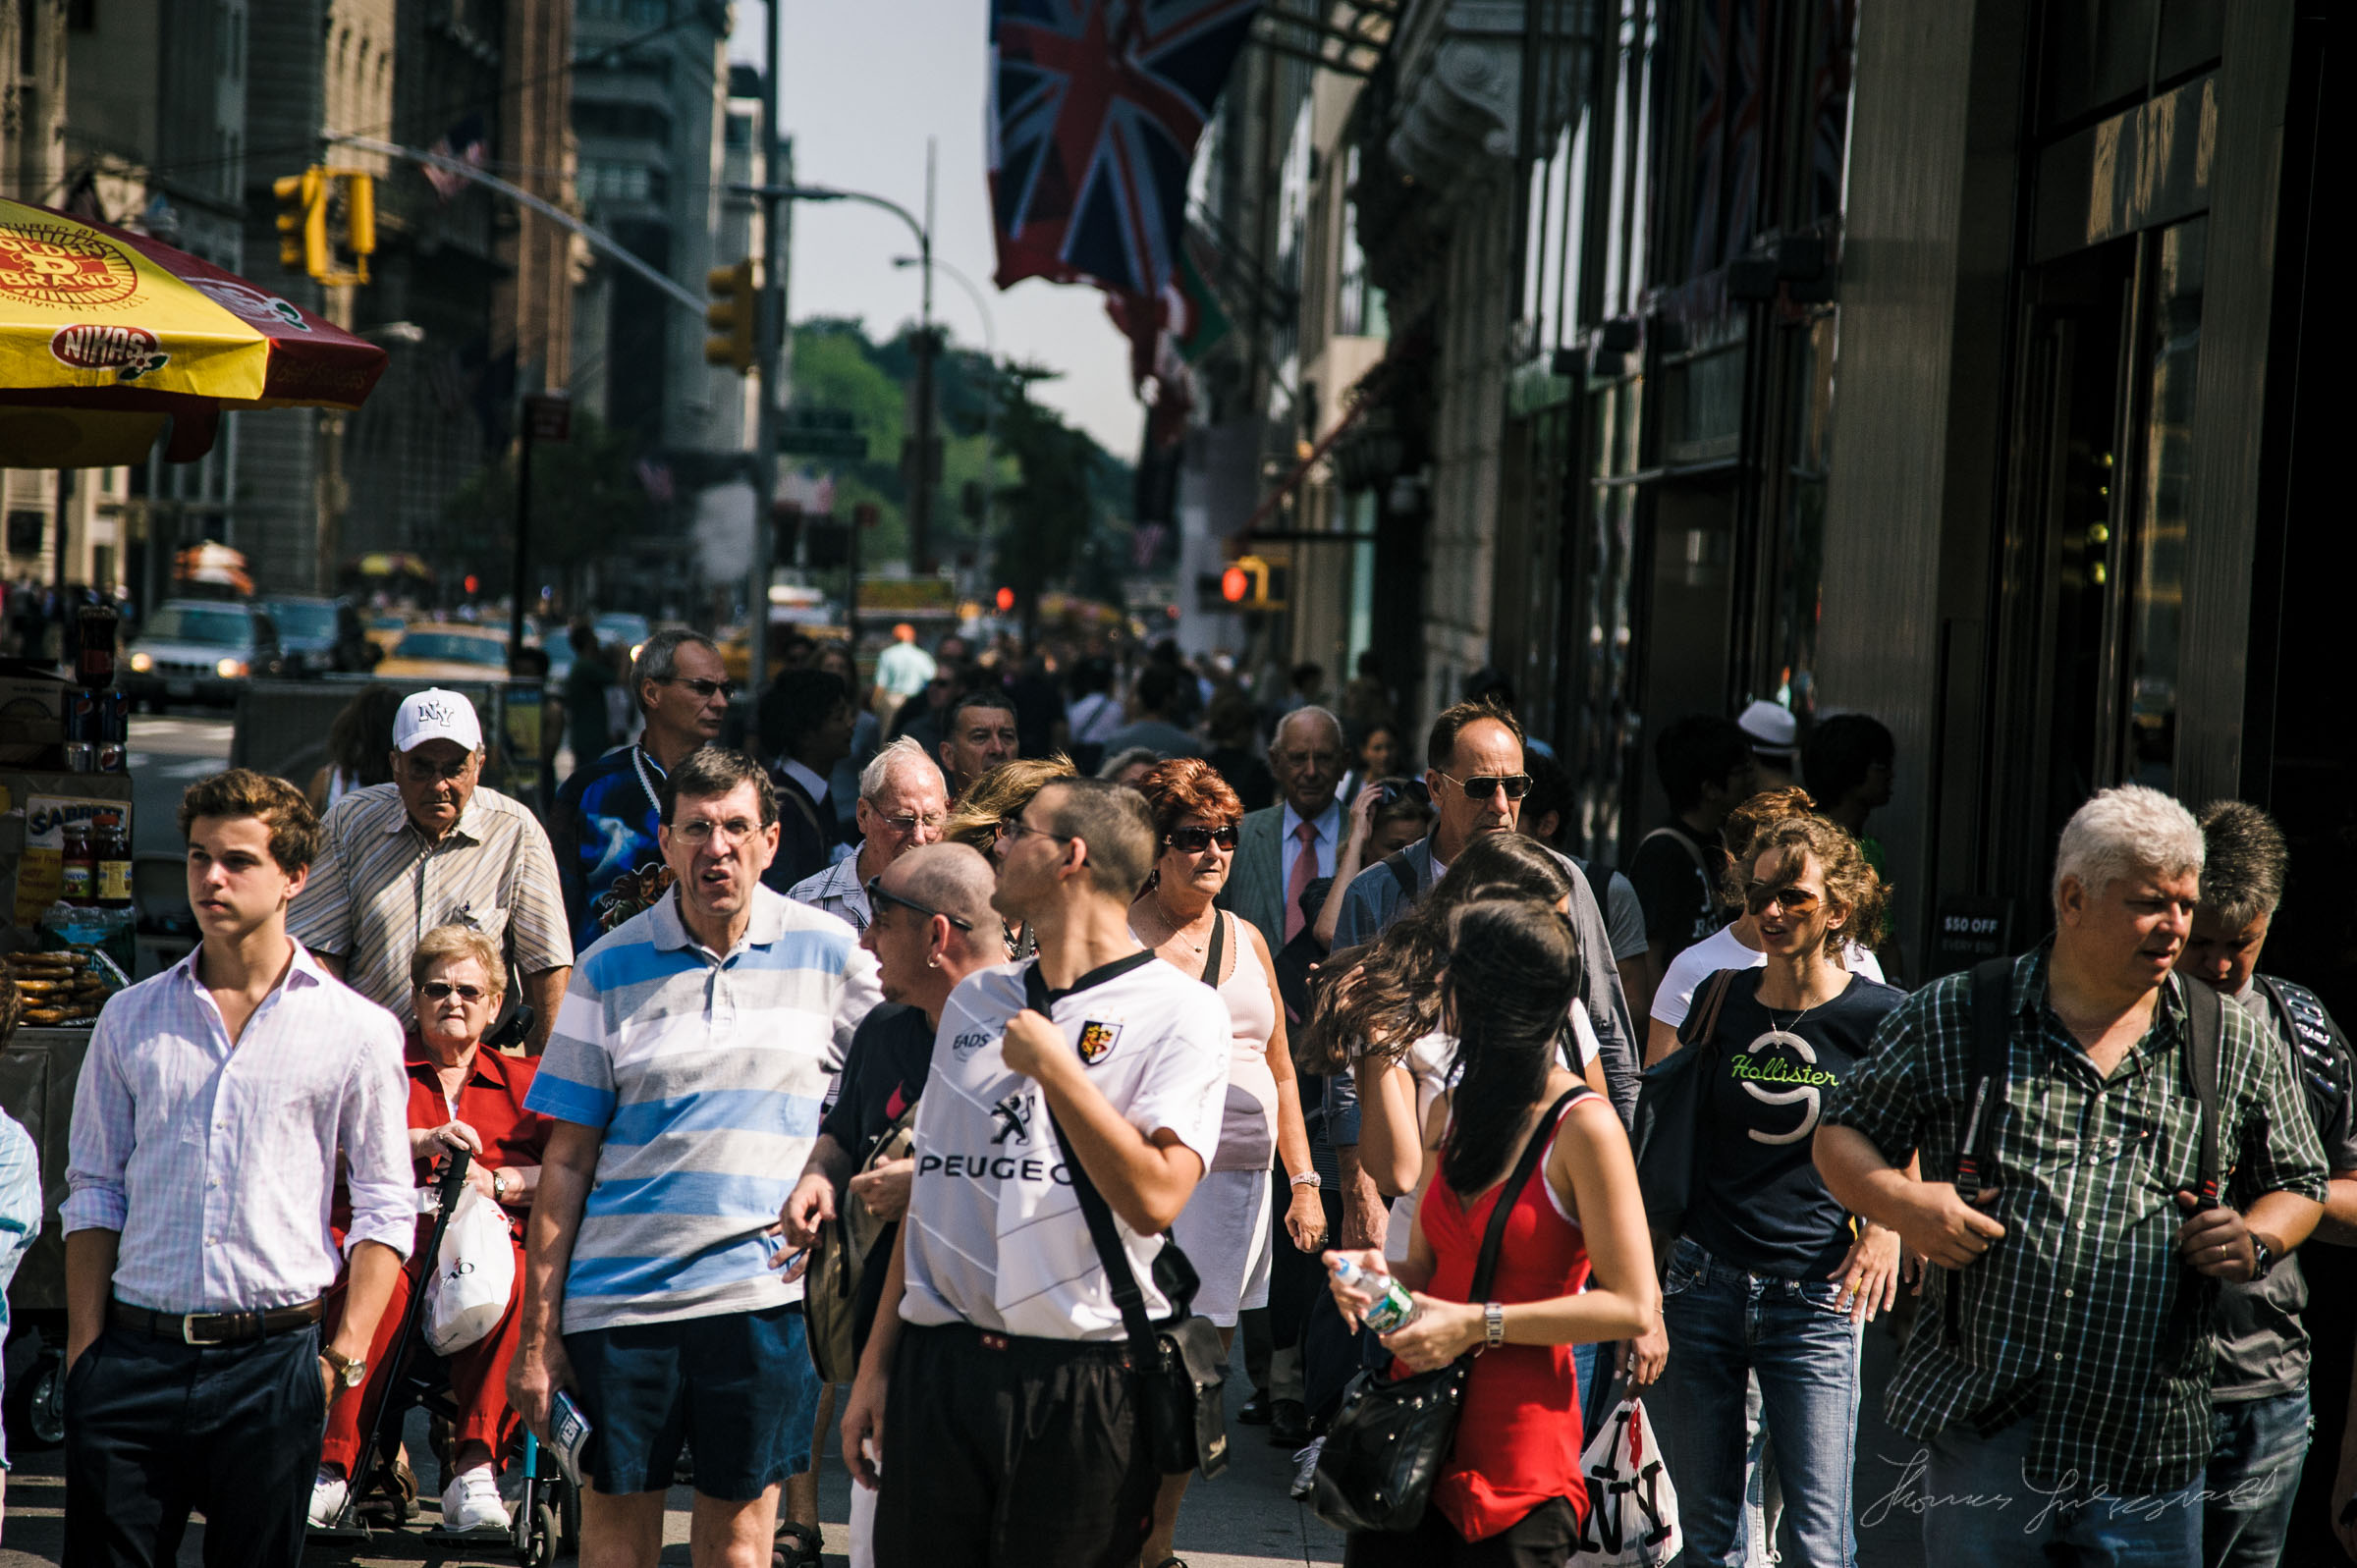 People waiting to cross in New York City